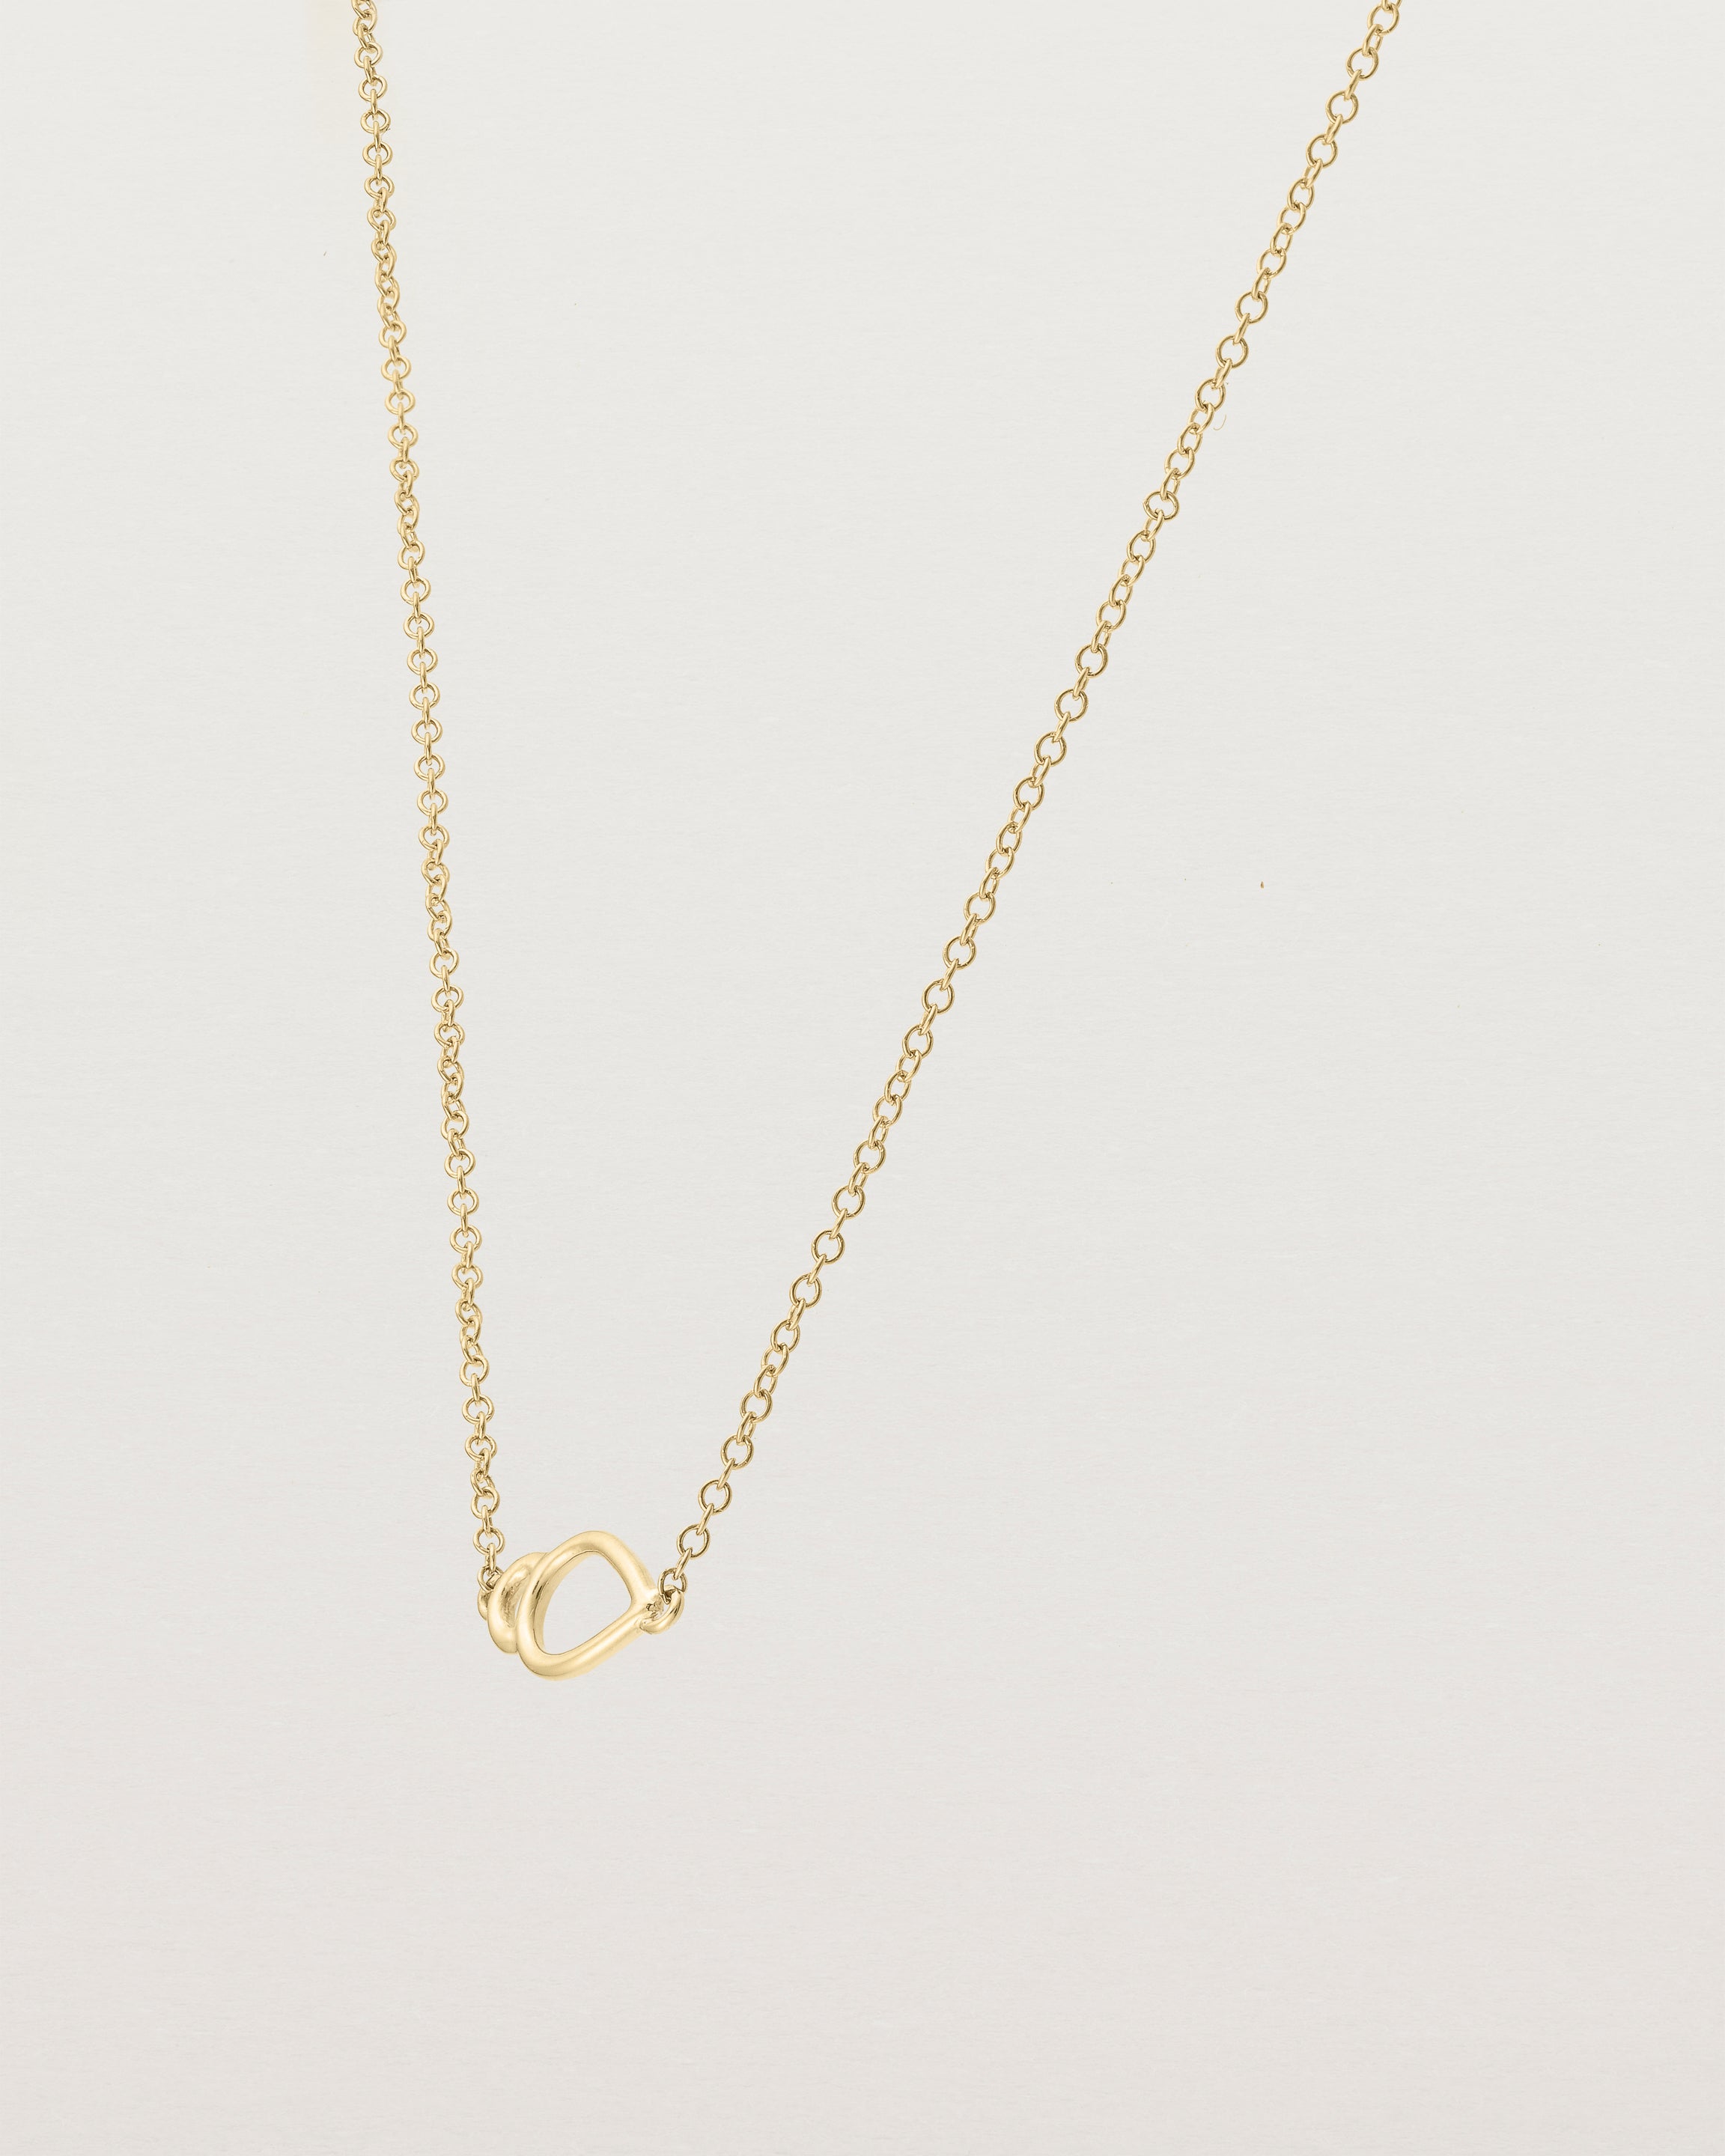 Angled view of  the Oana Necklace in Yellow Gold.